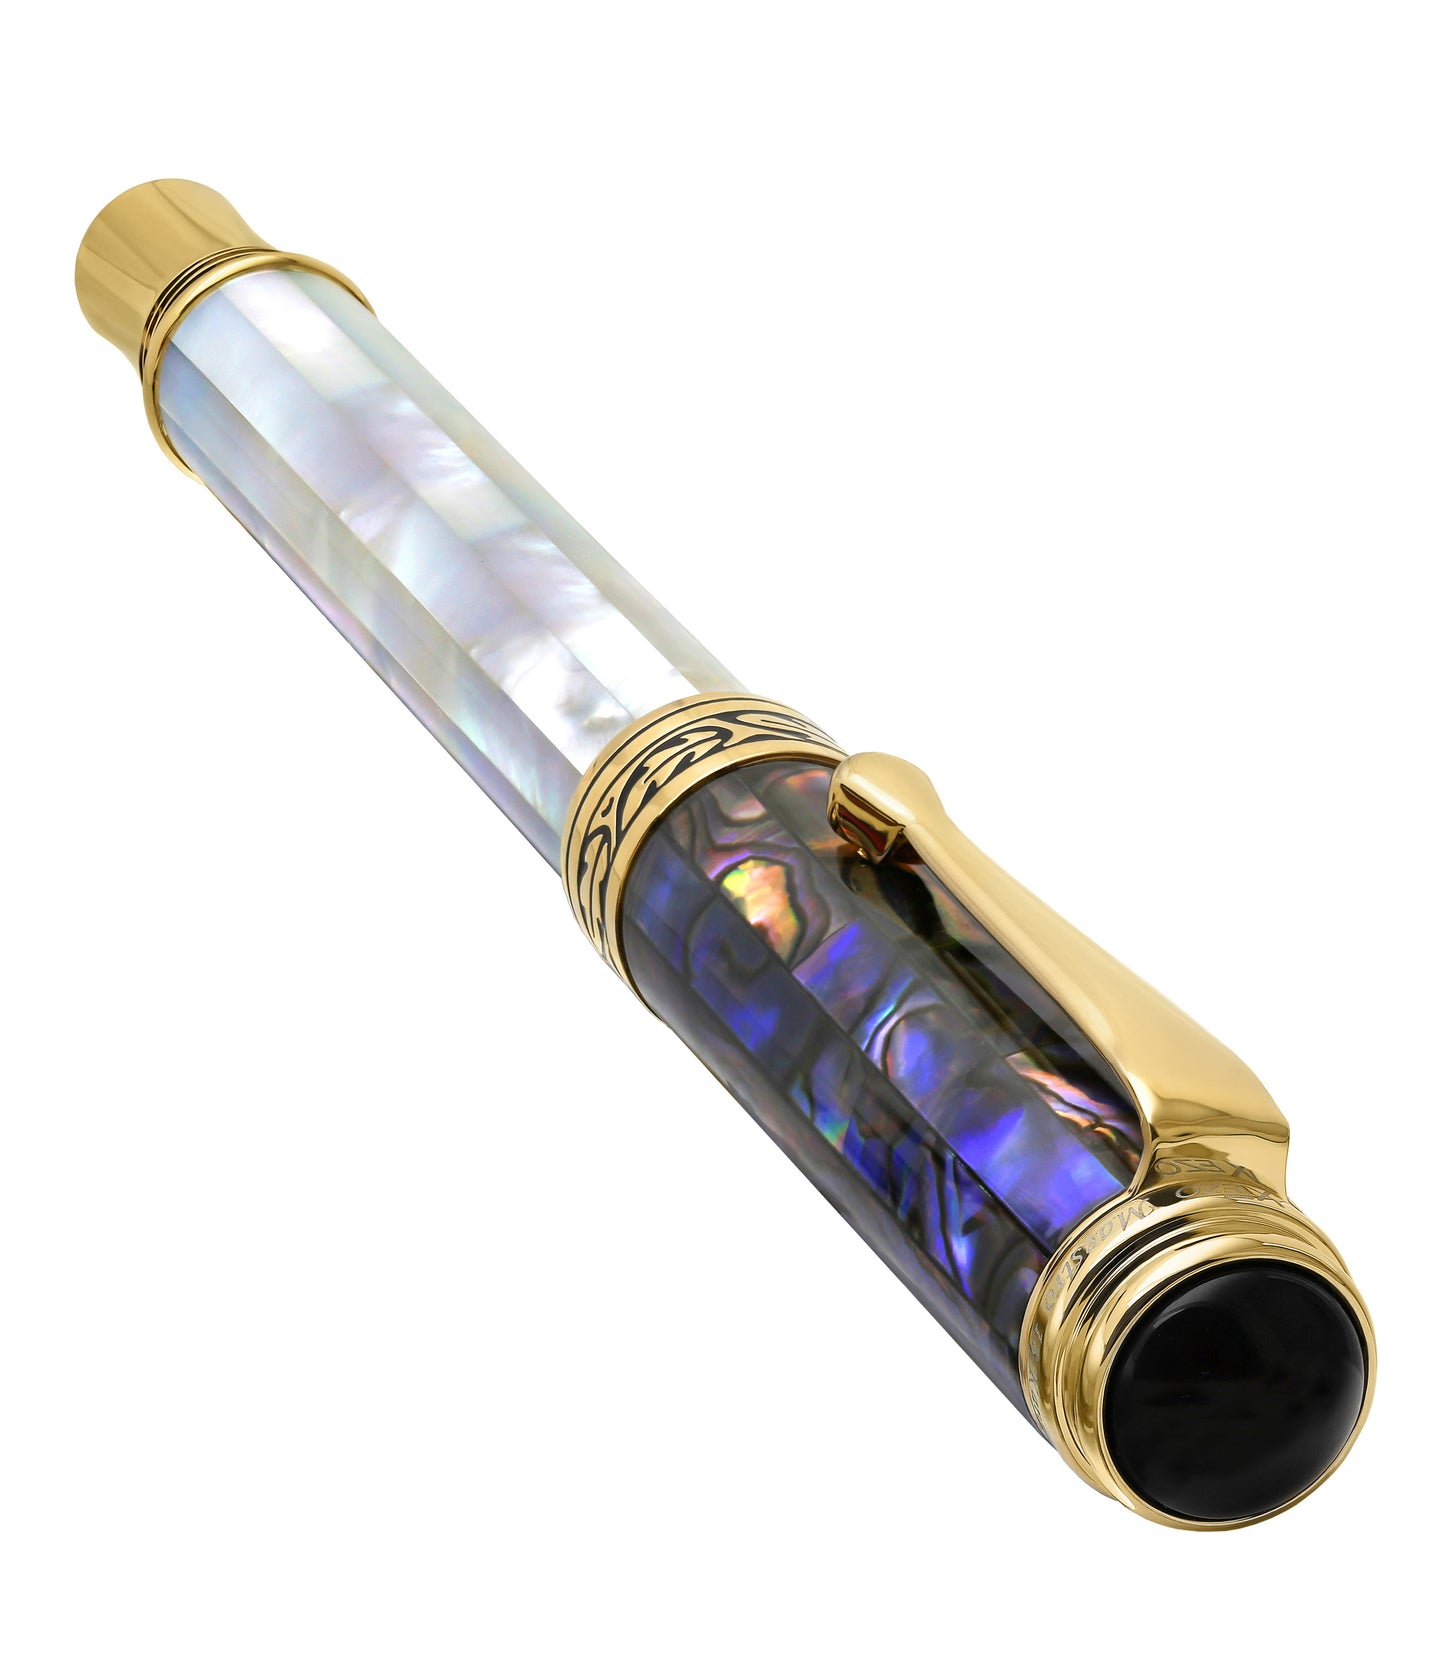 Xezo - Angled 3D view of the back of the Maestro MOP Sea Shell F fountain pen